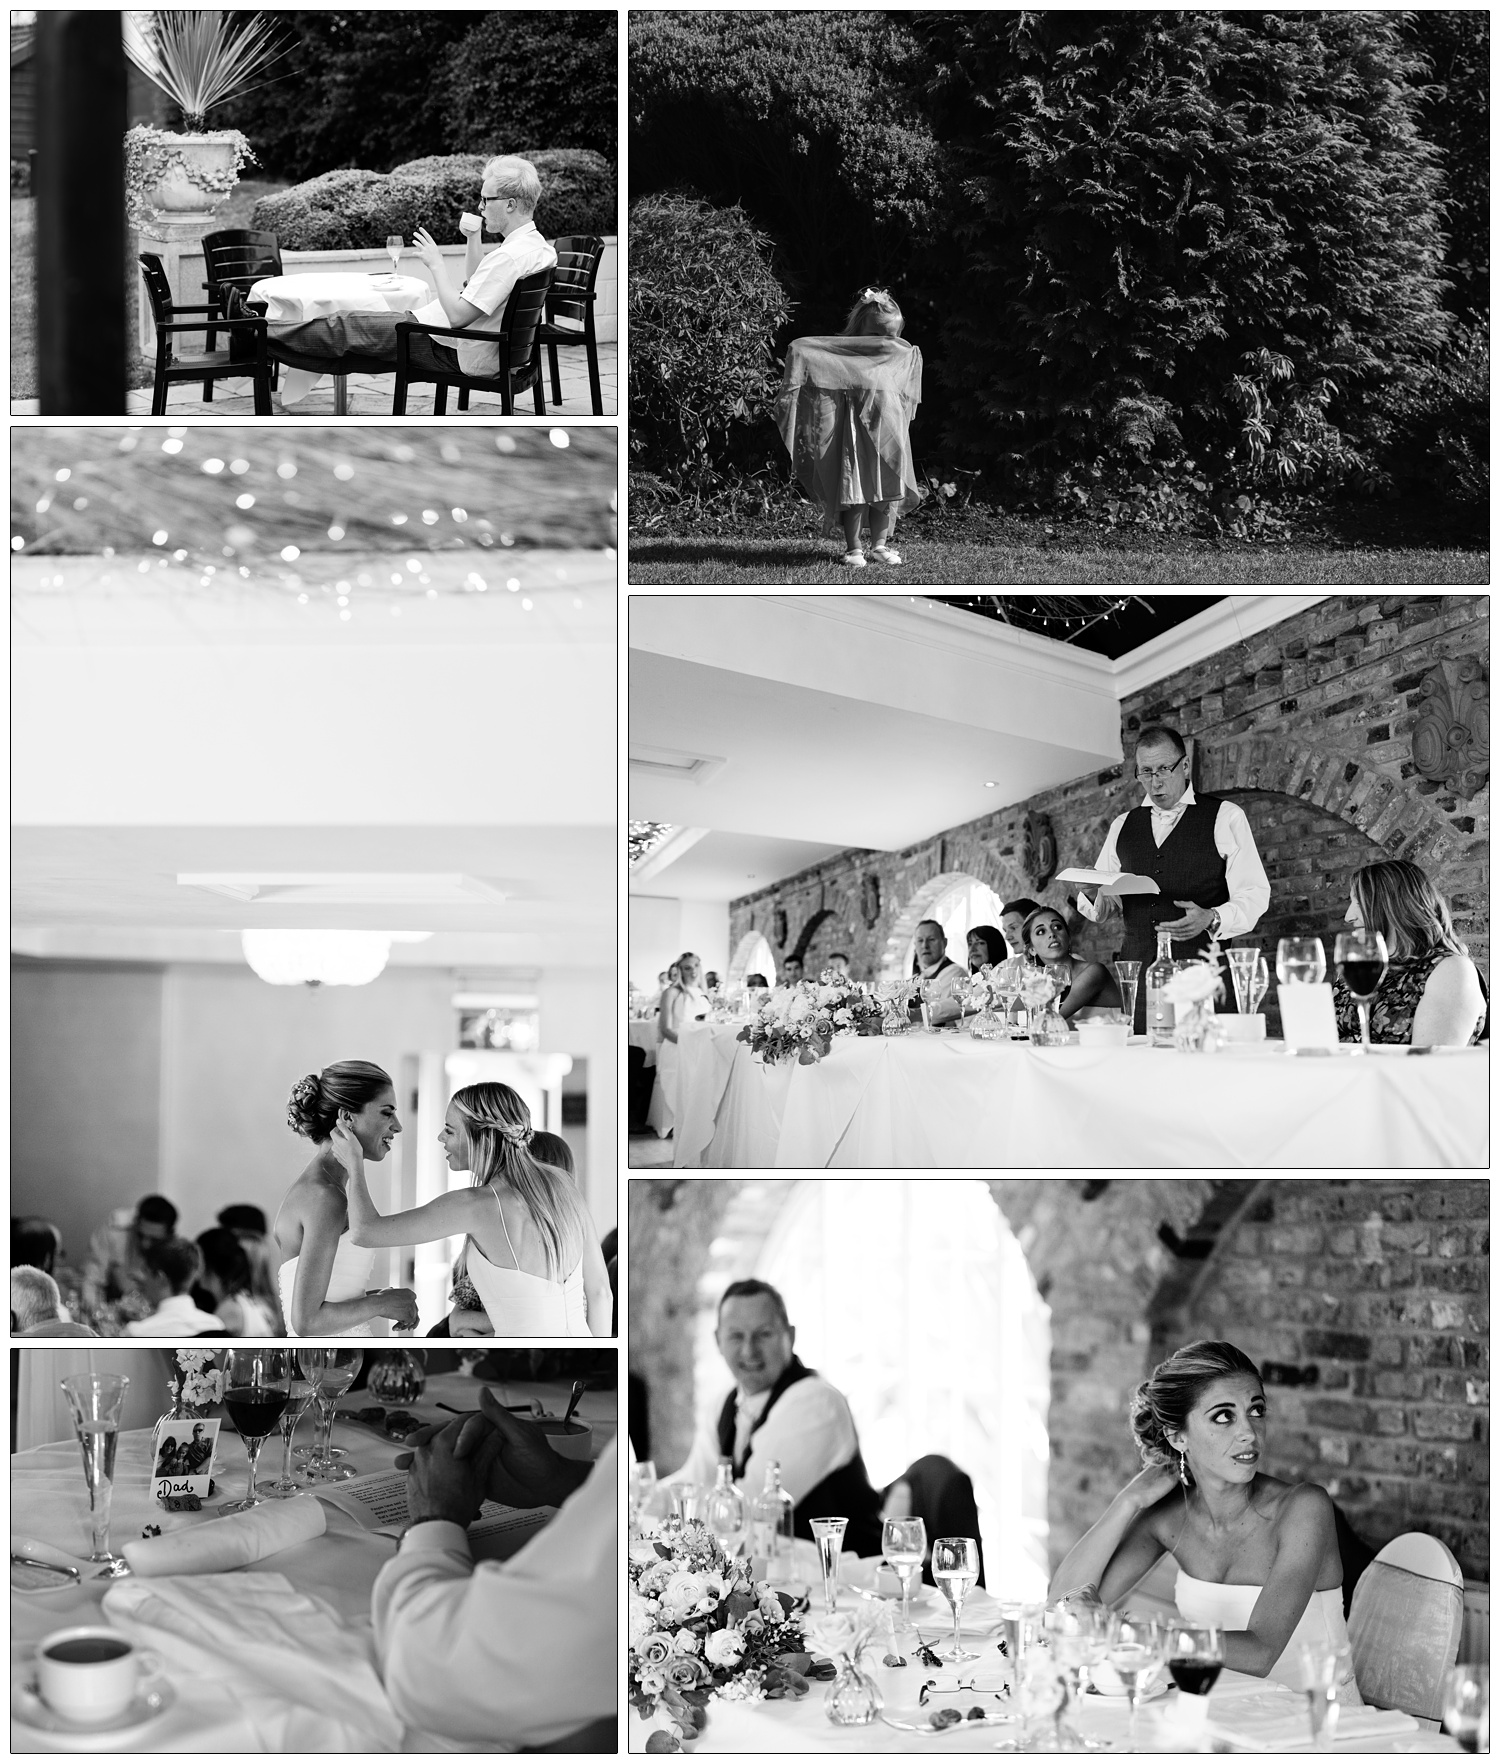 Black and white photographs from the wedding speeches. A man has a cup of tea outside. A small girl hides behind her dress. Father of the bride looks at his speech.